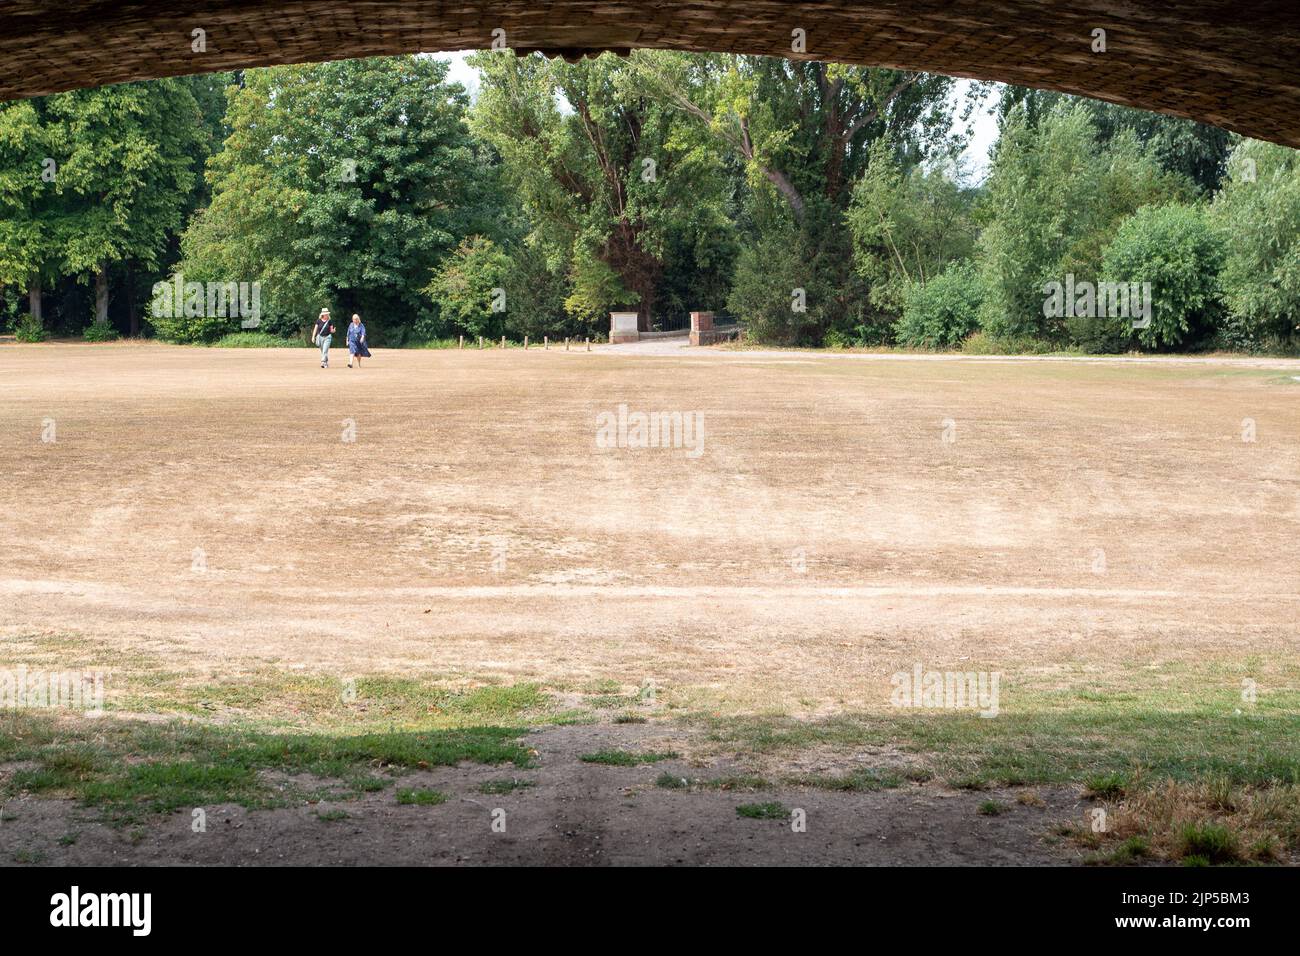 Eton, Windsor, Berkshire, UK. 15th August, 2022. In common with much of the UK, the heatwave and drought take their toll on the grounds of the public school, Eton College. Much needed rain is forecast for the week ahead and the South East is now officially in a drought. Credit: Maureen McLean/Alamy Live News Stock Photo